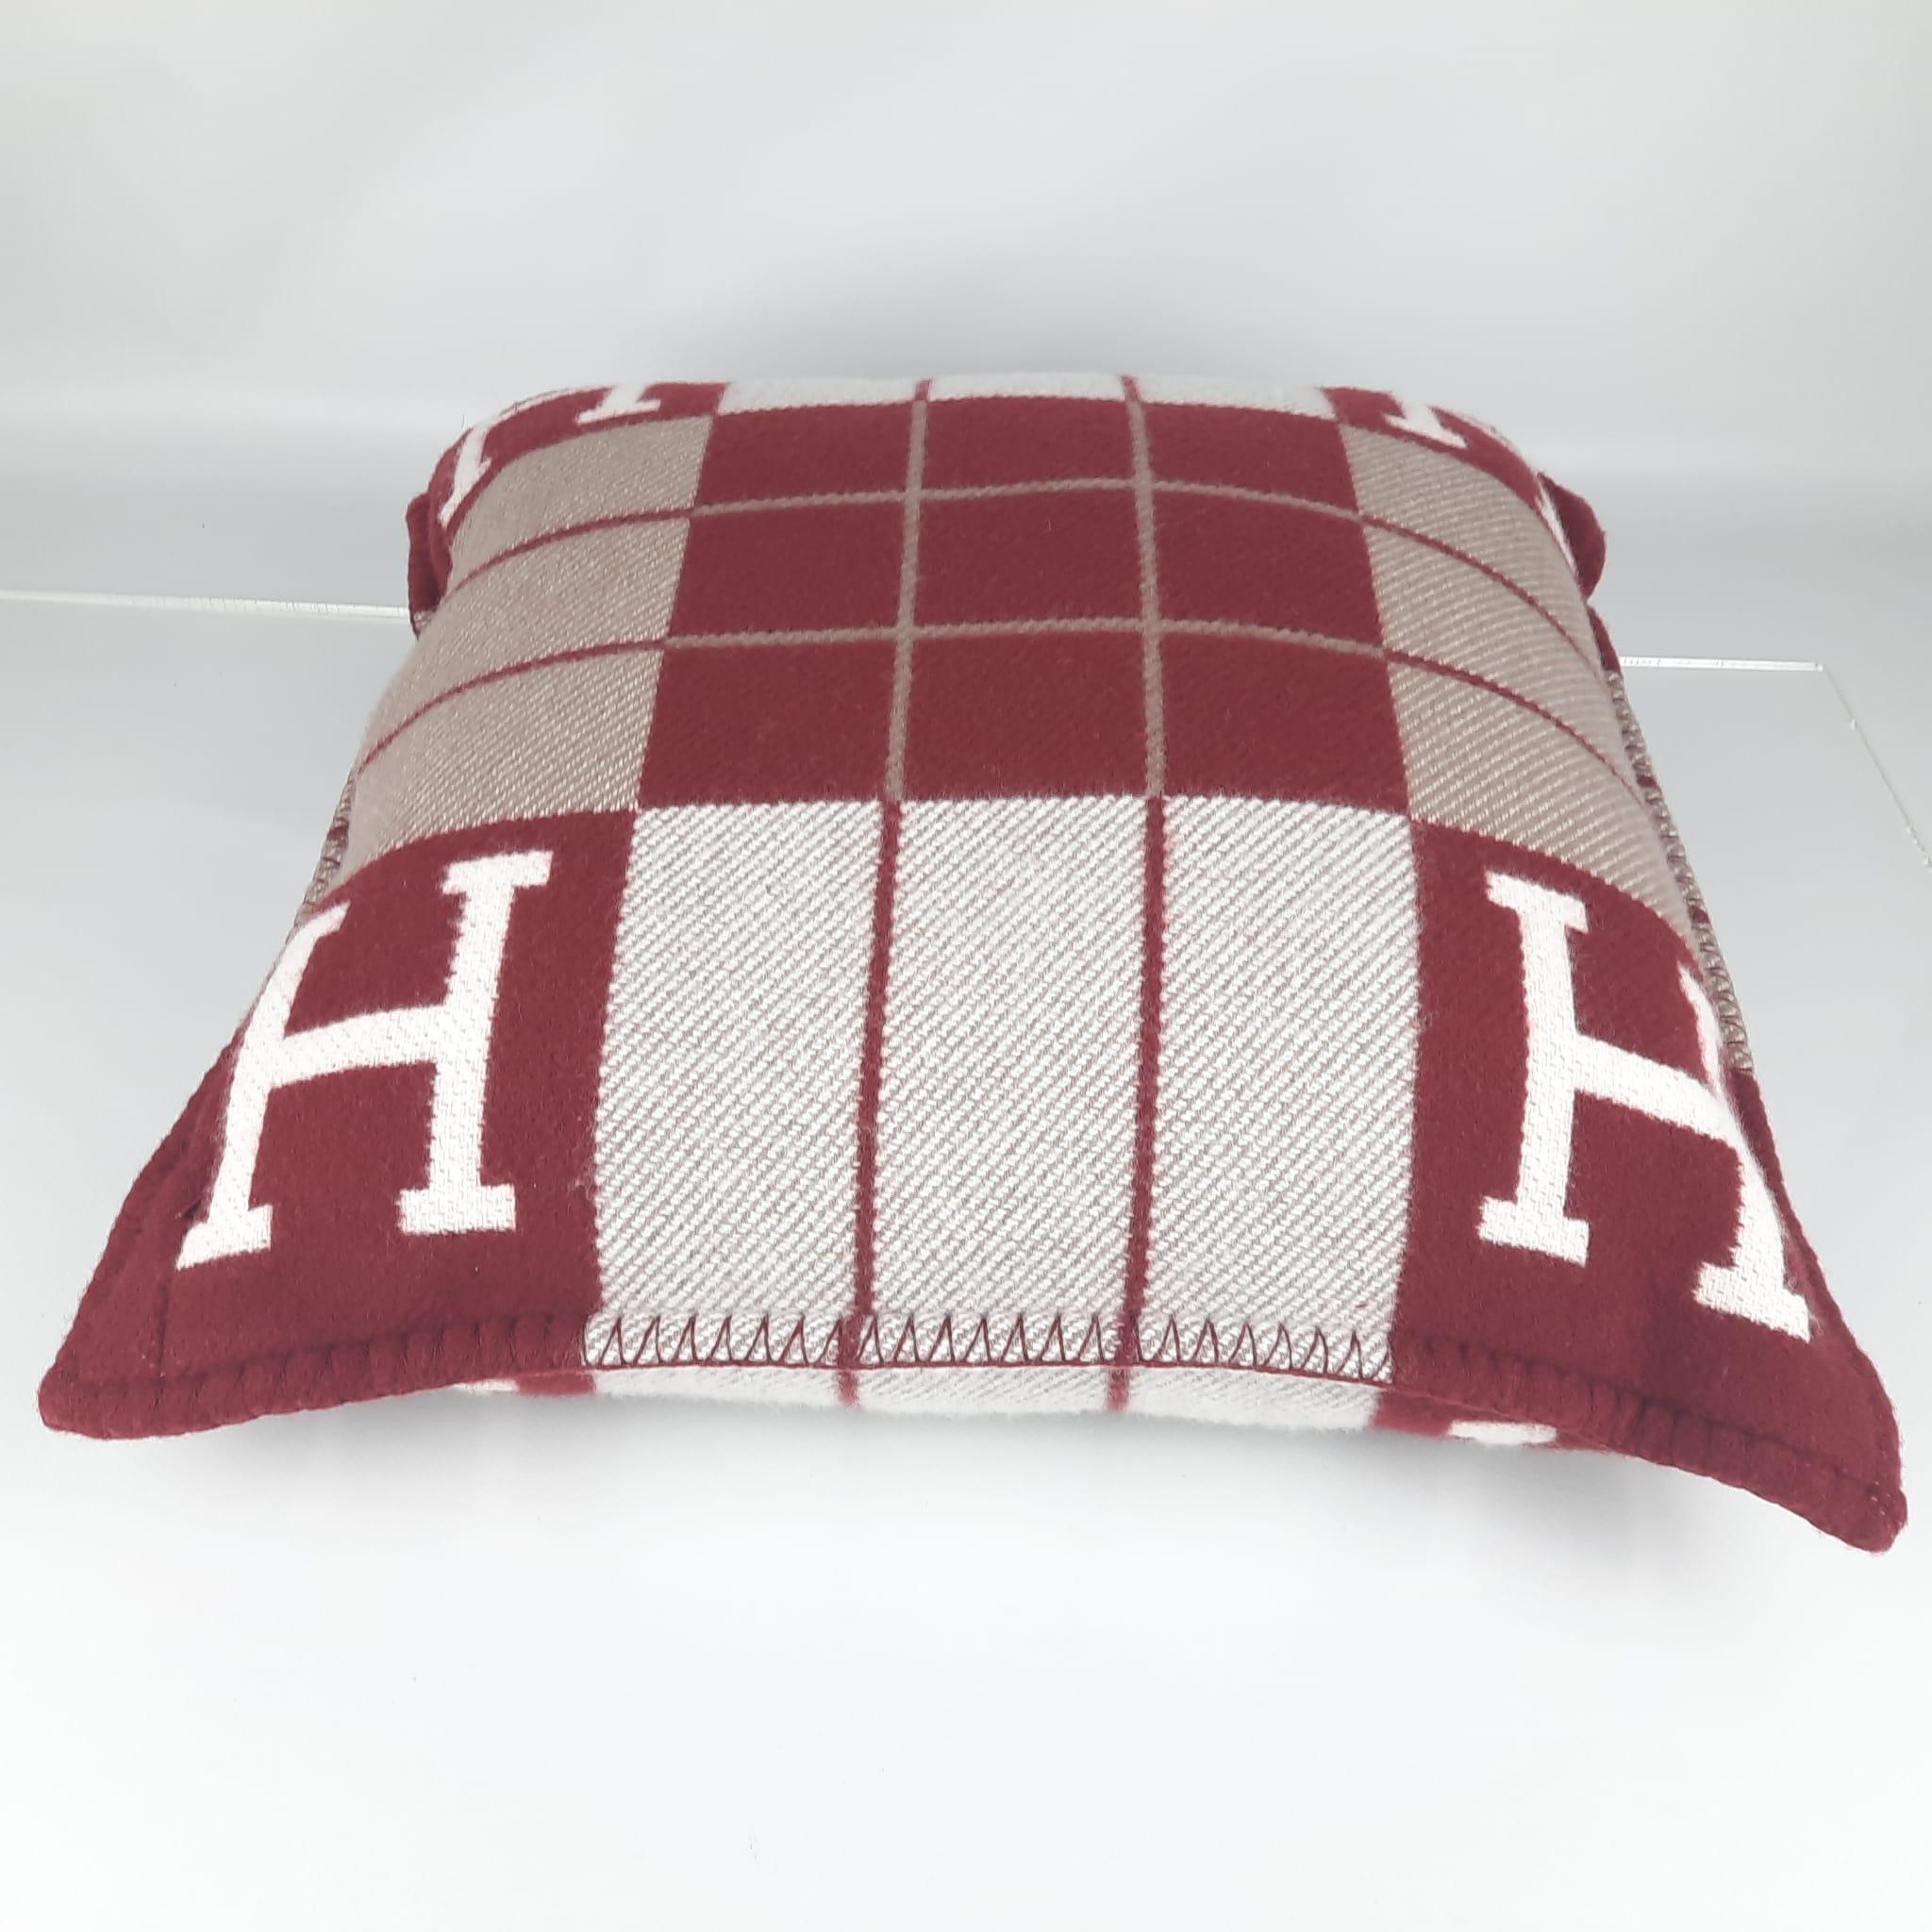 Pillow with removable cover in jacquard woven wool and cashmere
Hypoallergenic polyester filling)
Finished with blanket stitch
Made in Scotland
Designed by Hermès Studio
Dimensions: L 50 x H 50 cm